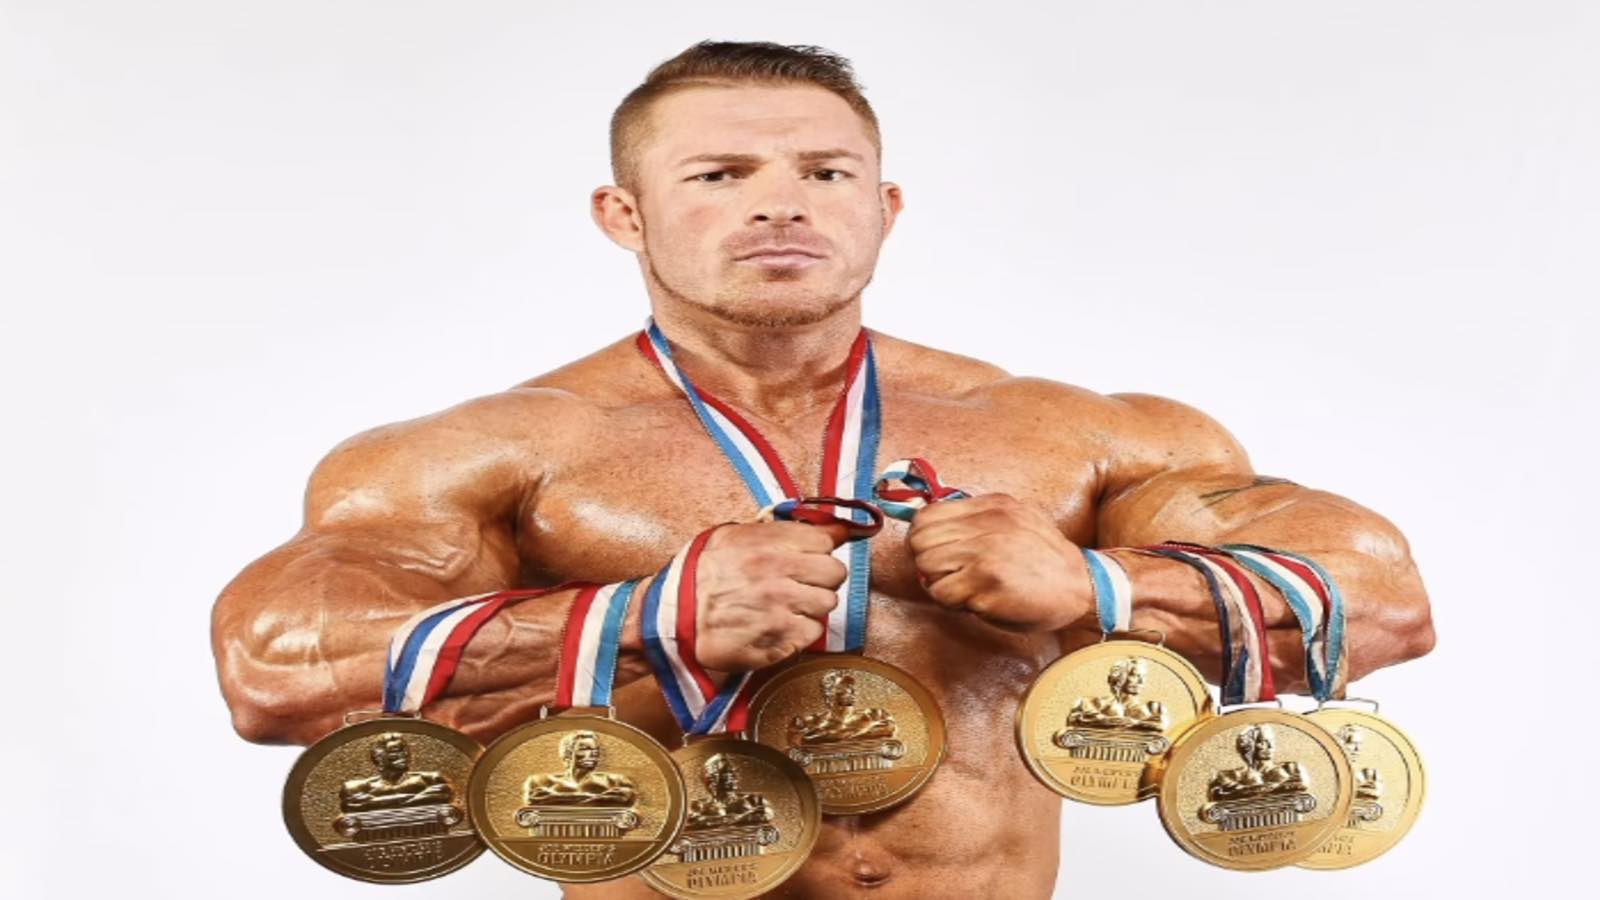 flex-lewis-would-end-his-retirement-and-consider-a-comeback-for-seven-figure-offer-–-breaking-muscle